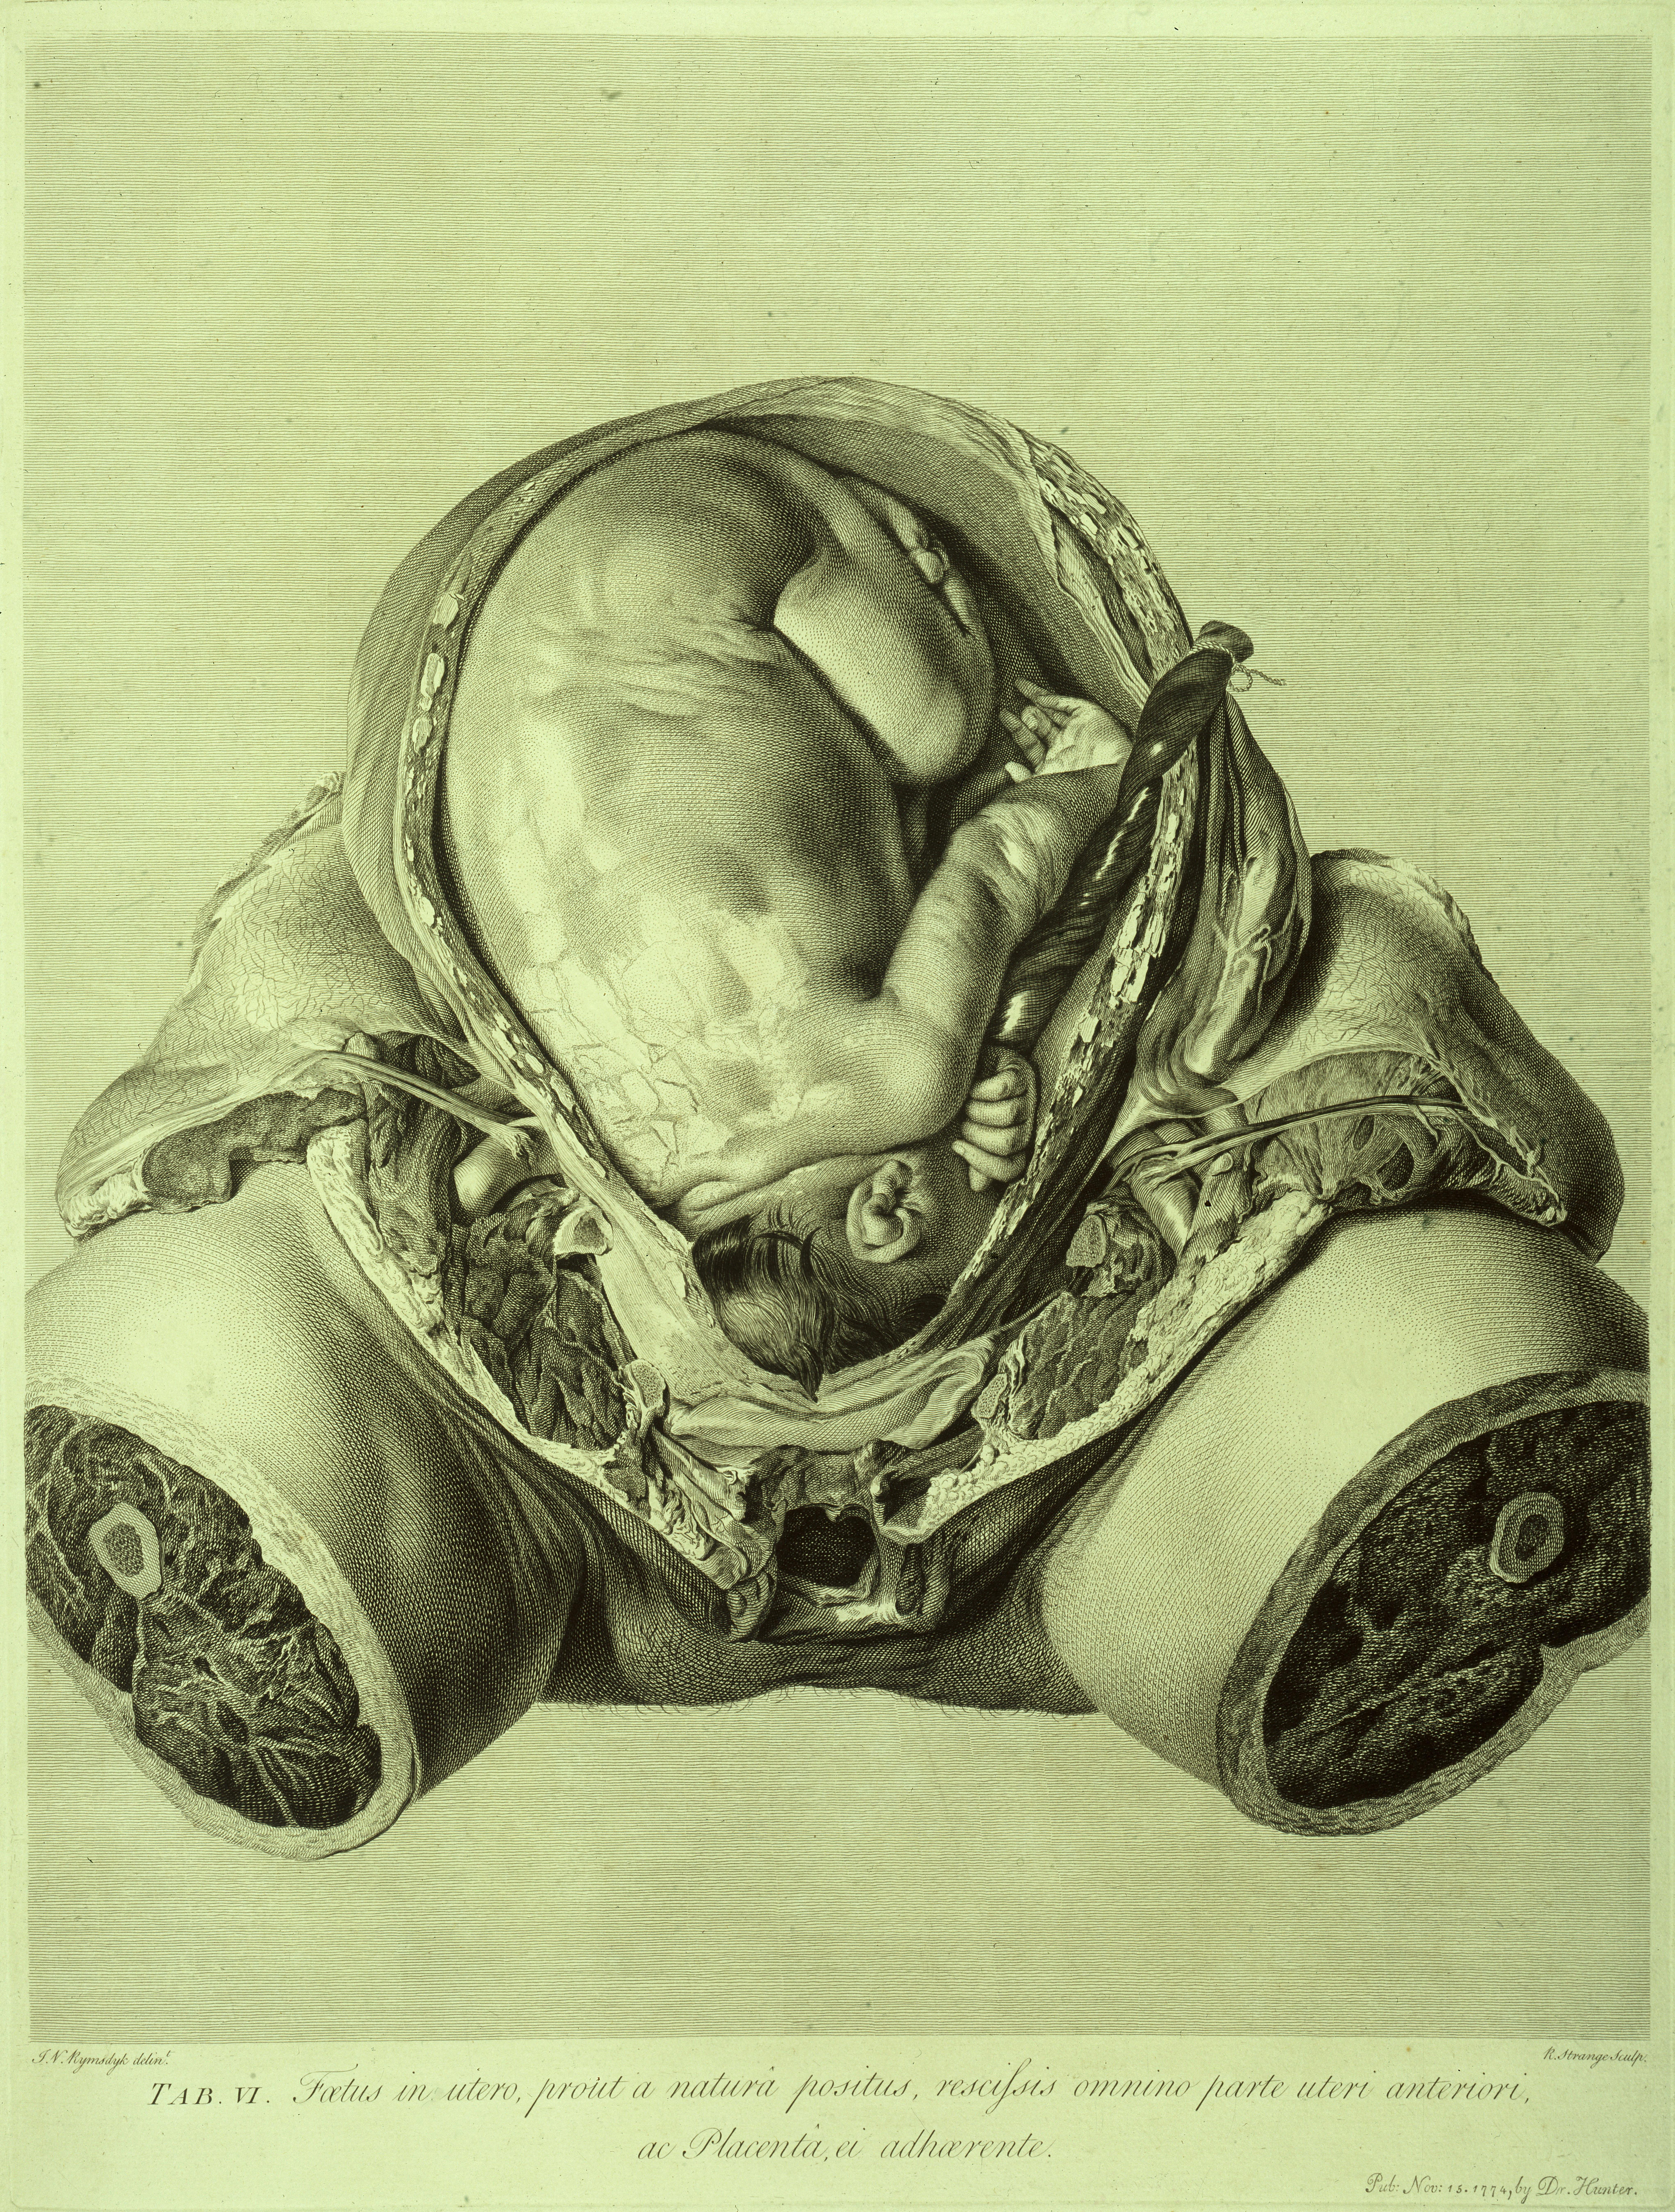 Anatomia uteri humani gravidi tabulis illustrata ...The Anatomy of the Human Gravid Uterus Exhibited in Figures, Table VI: The Child in the Womb, in its Natural Situation